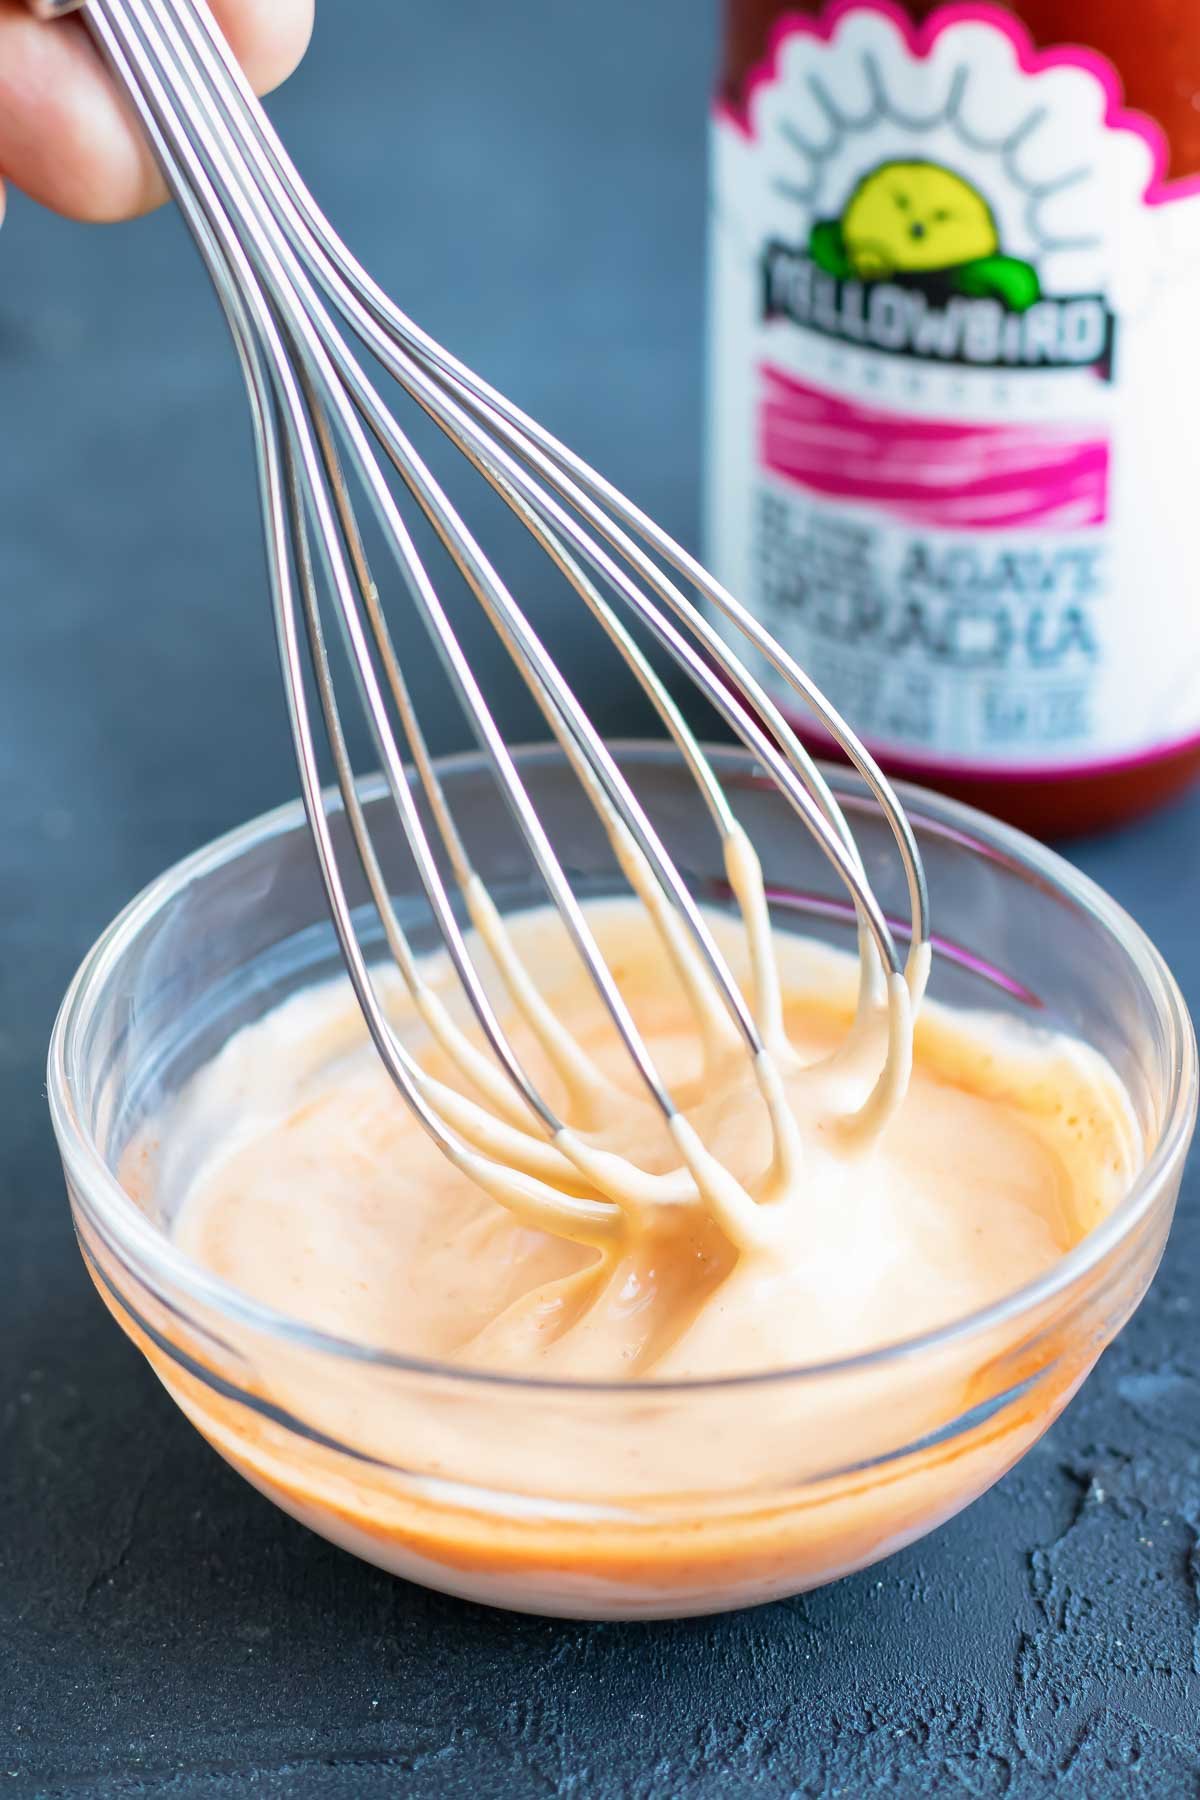 Sriracha mayo sauce is made in a bowl.